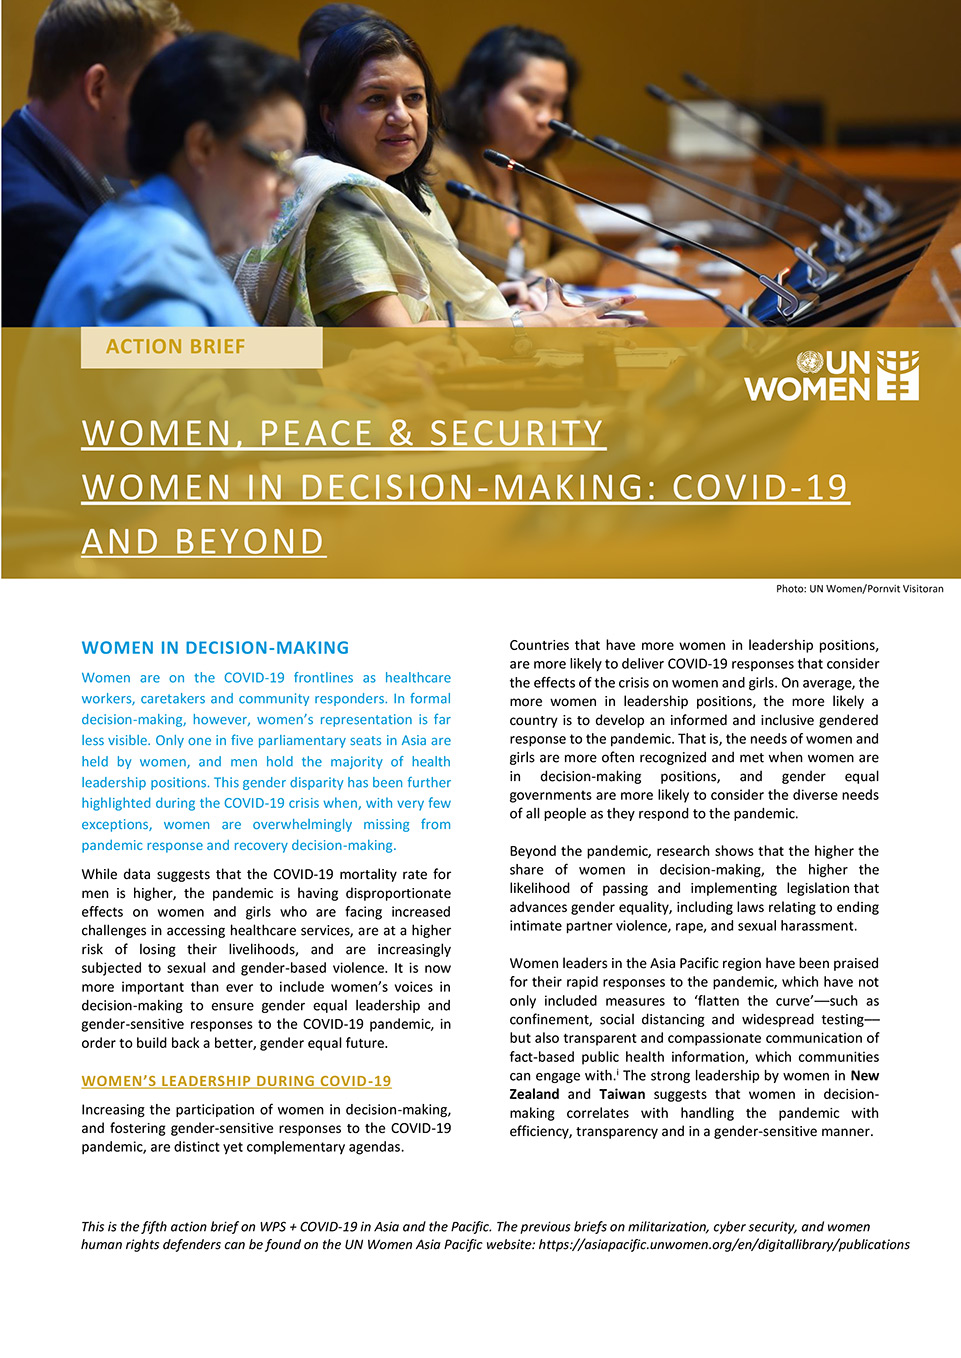 Women, Peace & Security | Women in decision-making: COVID-19 and beyond